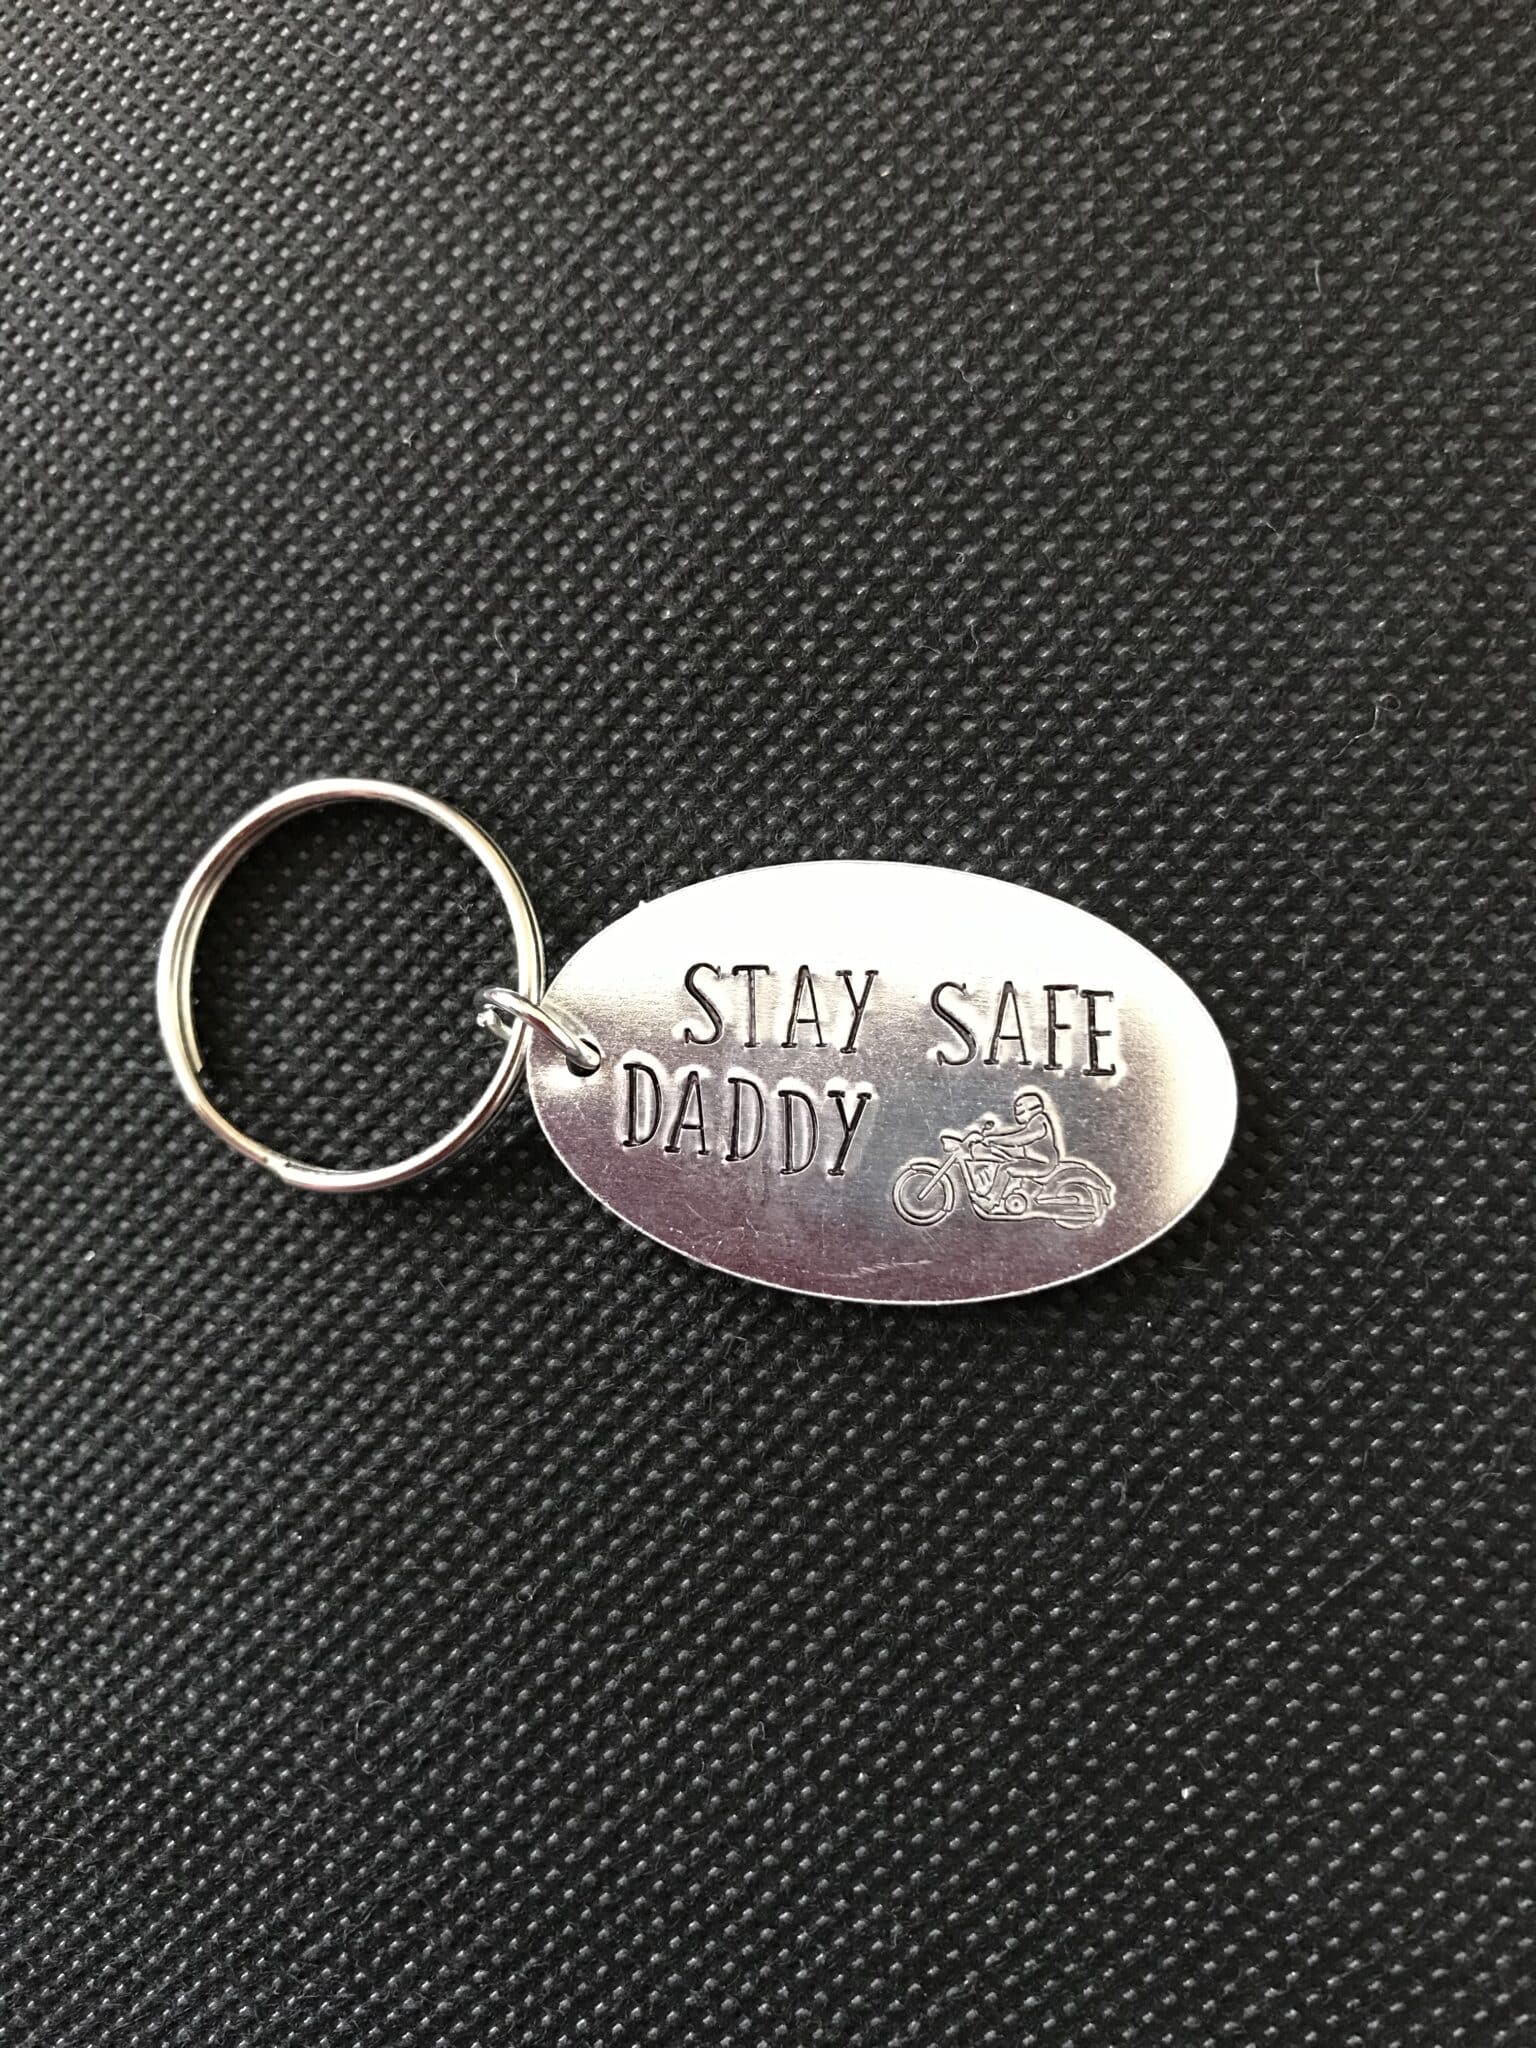 Daddy hand stamped key ring - main product image